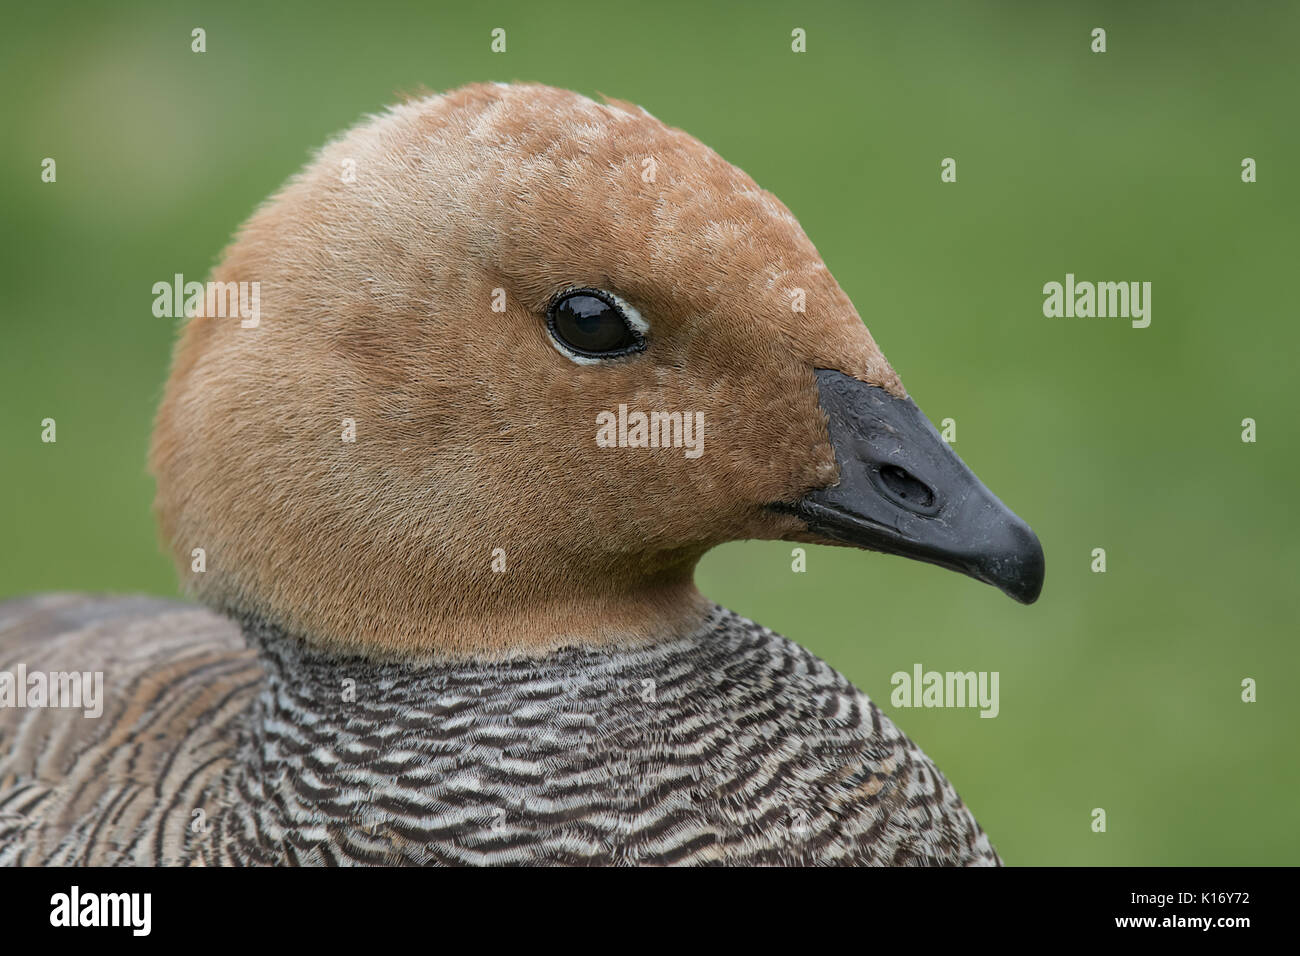 close up head profile portrait of a ruddy headed goose looking to the right Stock Photo